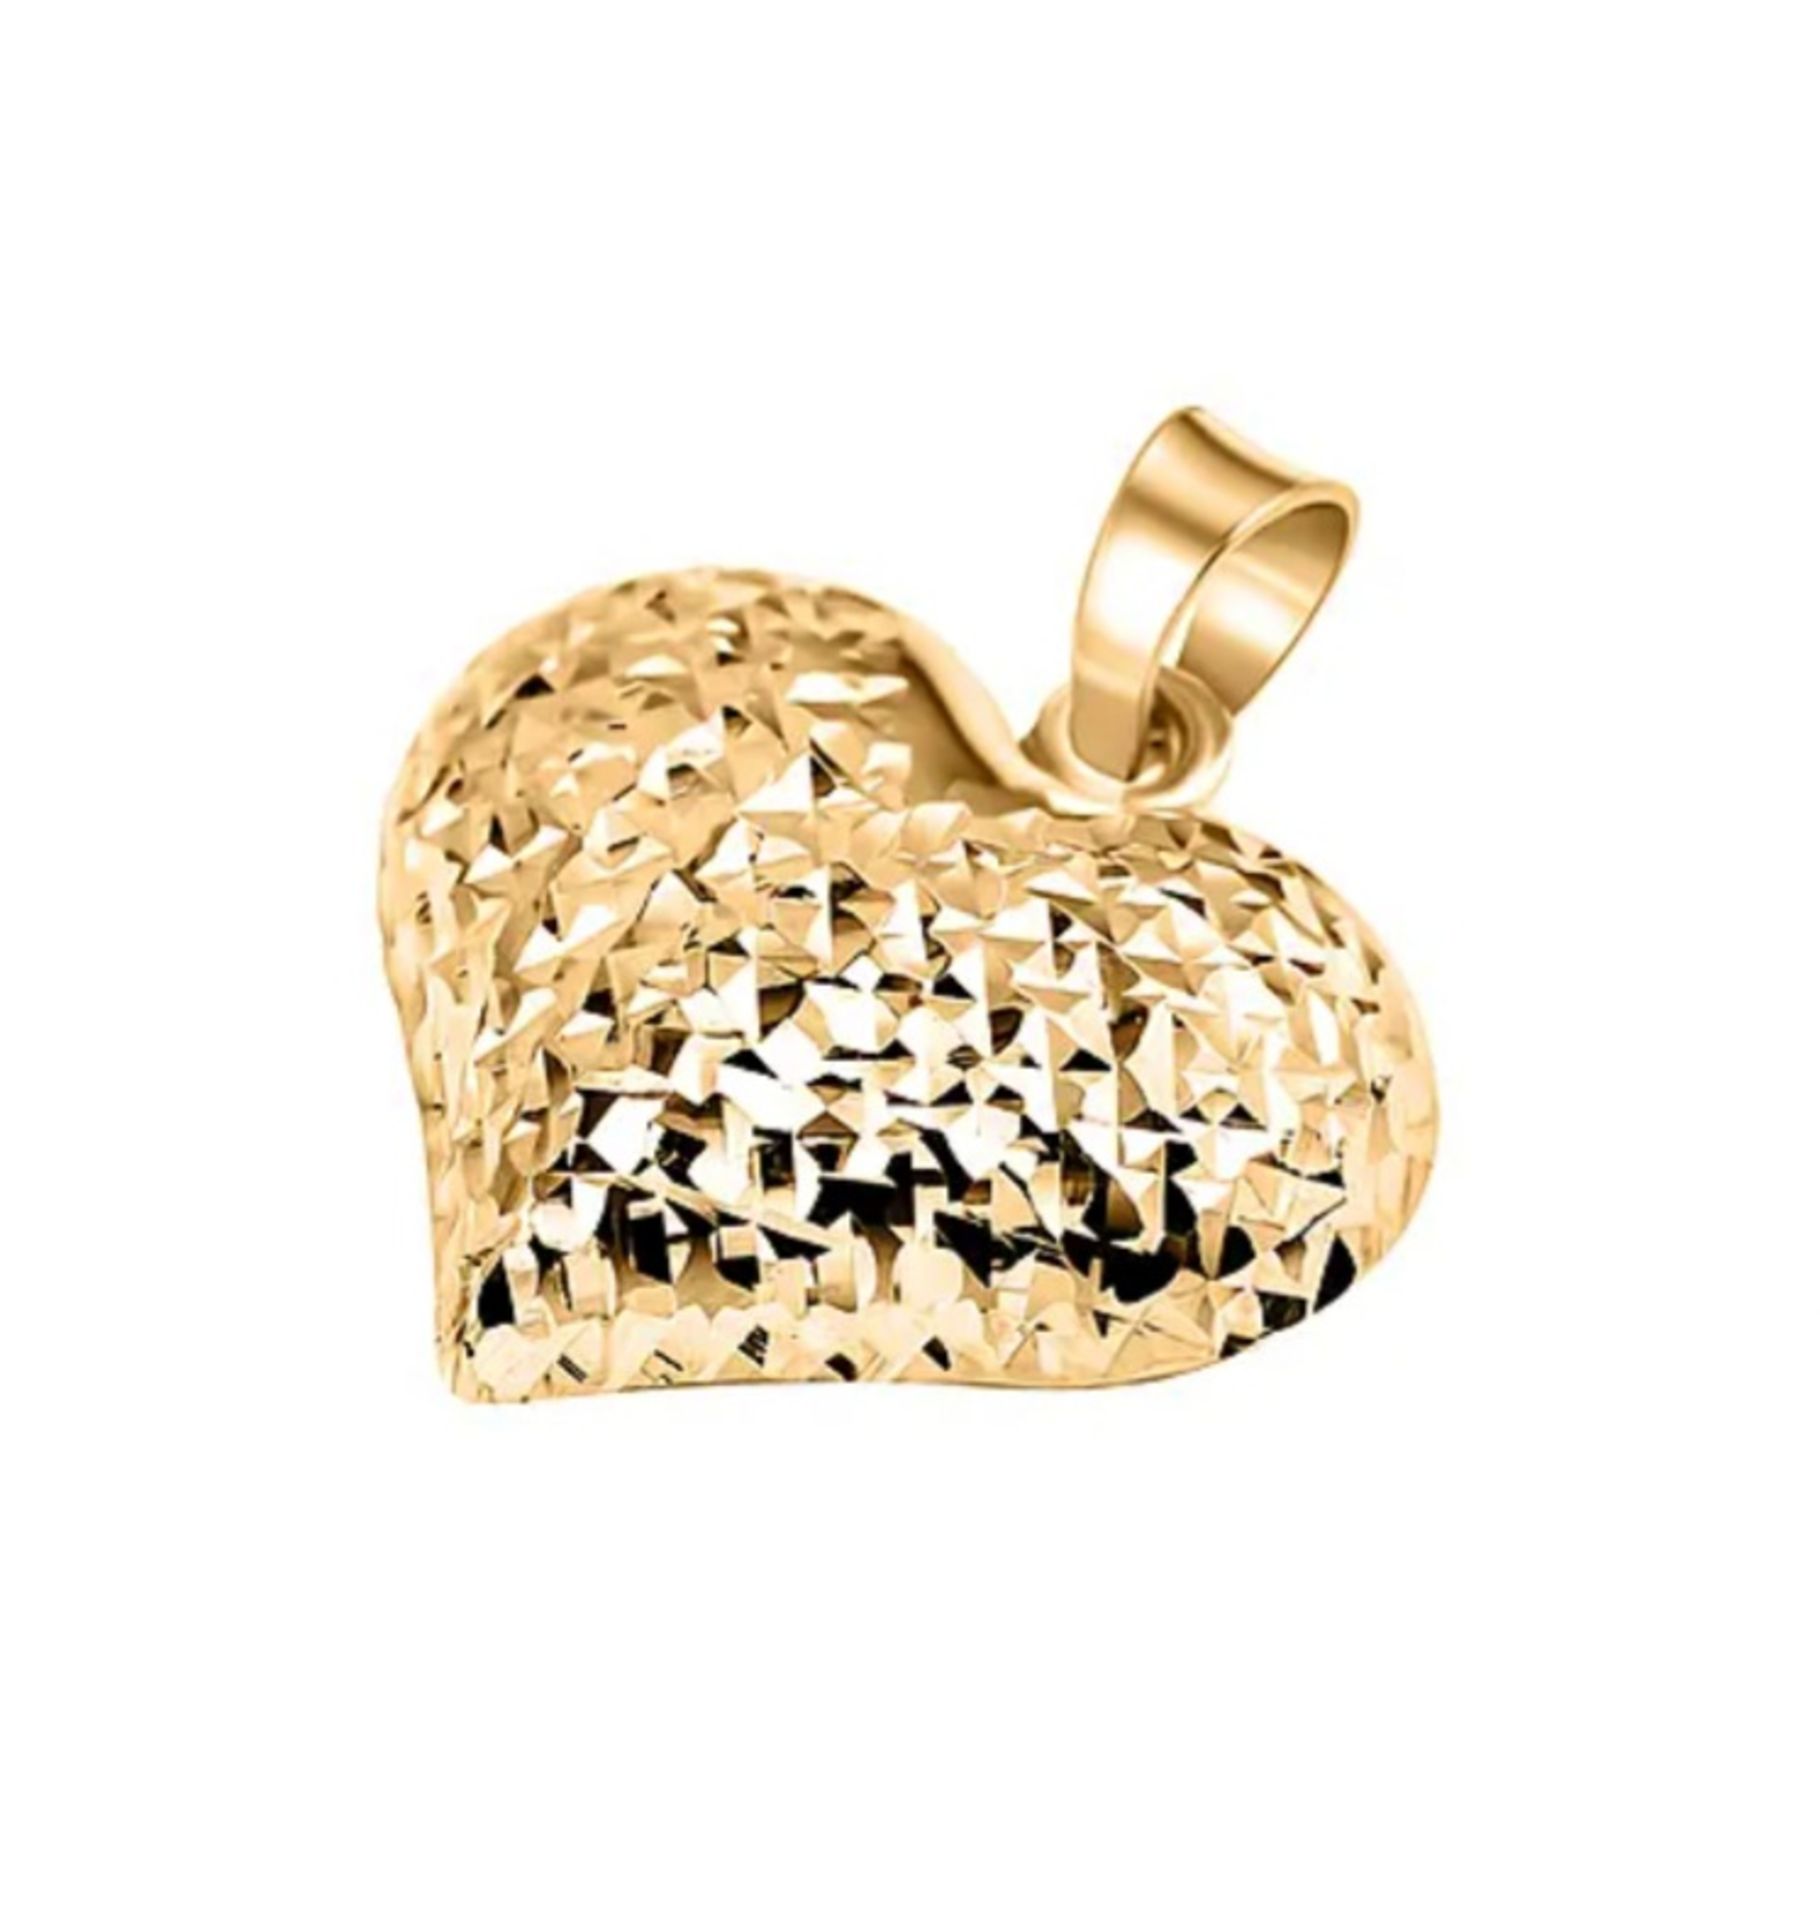 NEW! 9K Yellow Gold Heart Pendant - Image 4 of 4